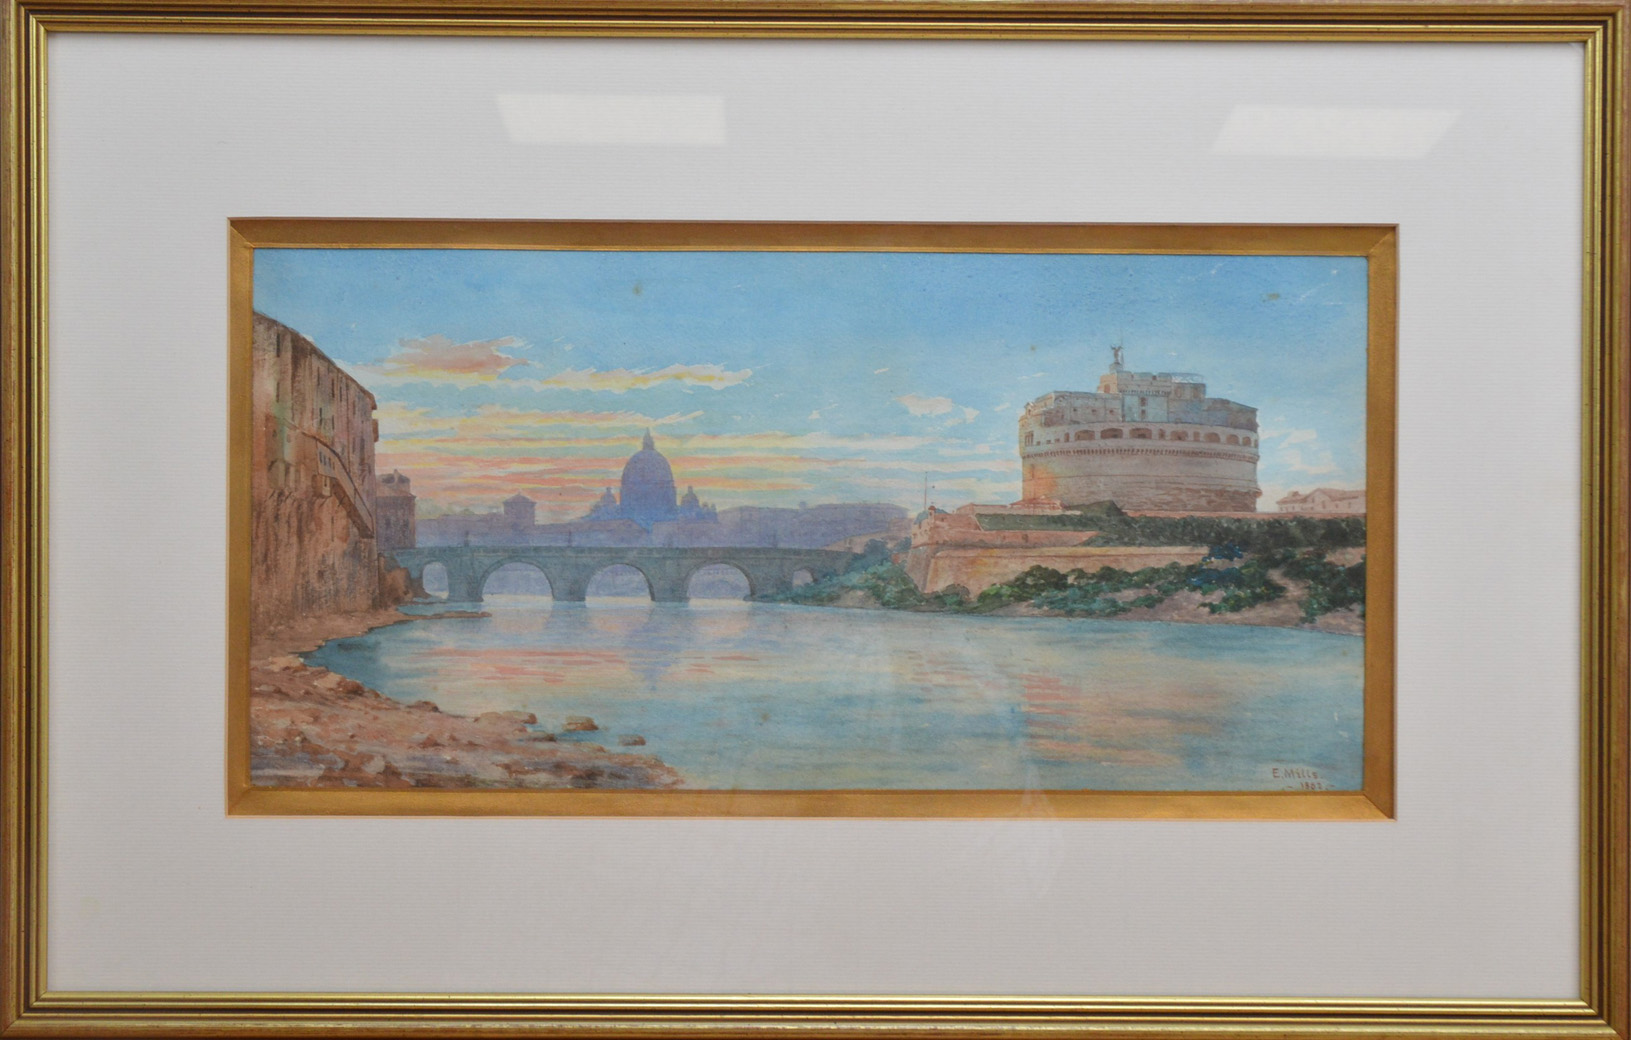 E. Mills (19th century), a view of Castel Sant'Angelo from the banks of the River Tiber, signed